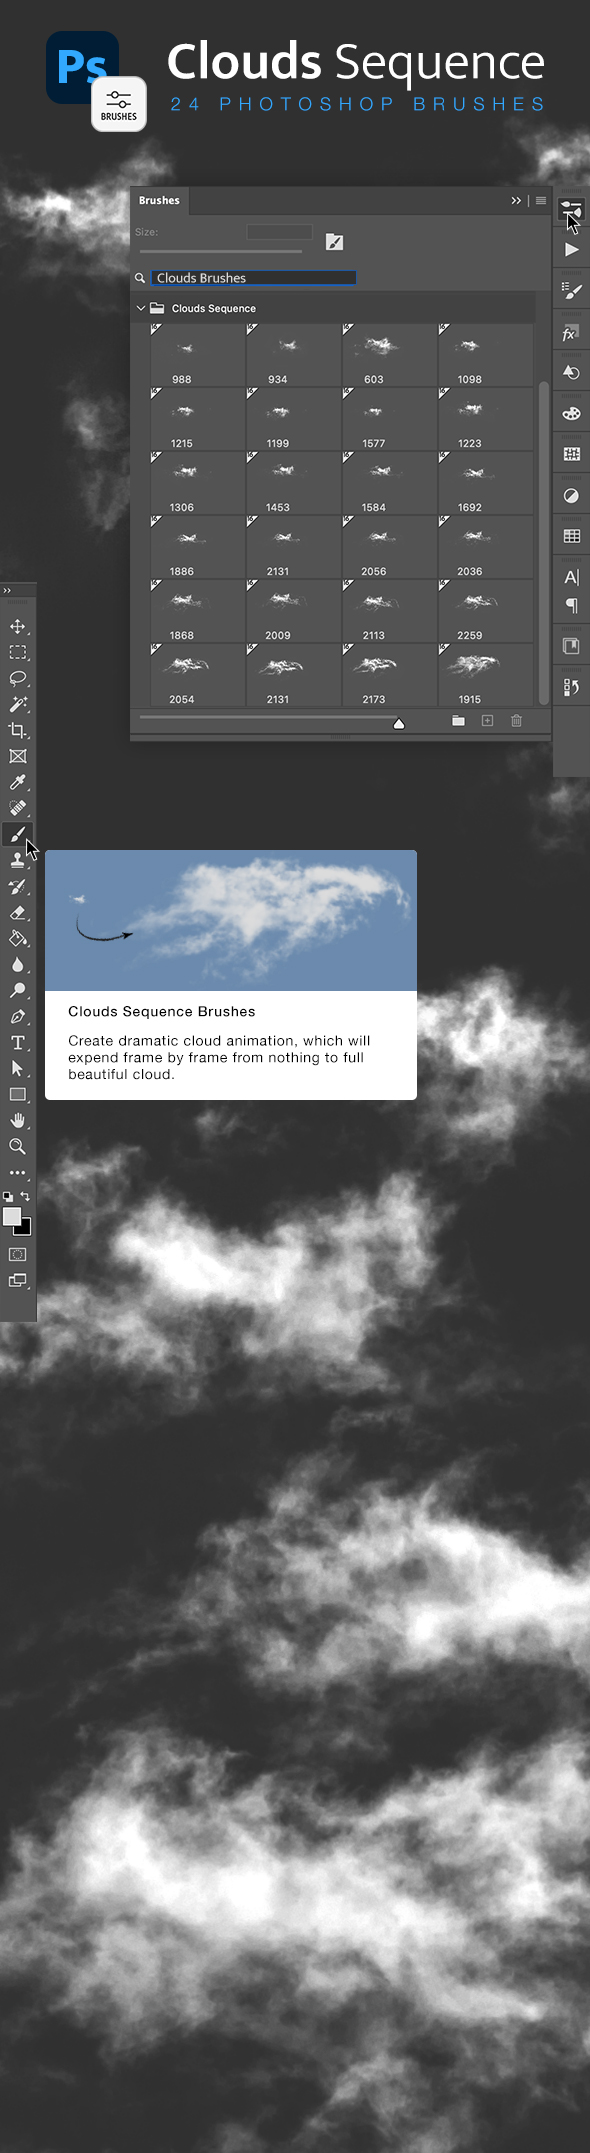 [DOWNLOAD]Clouds Sequence Brushes